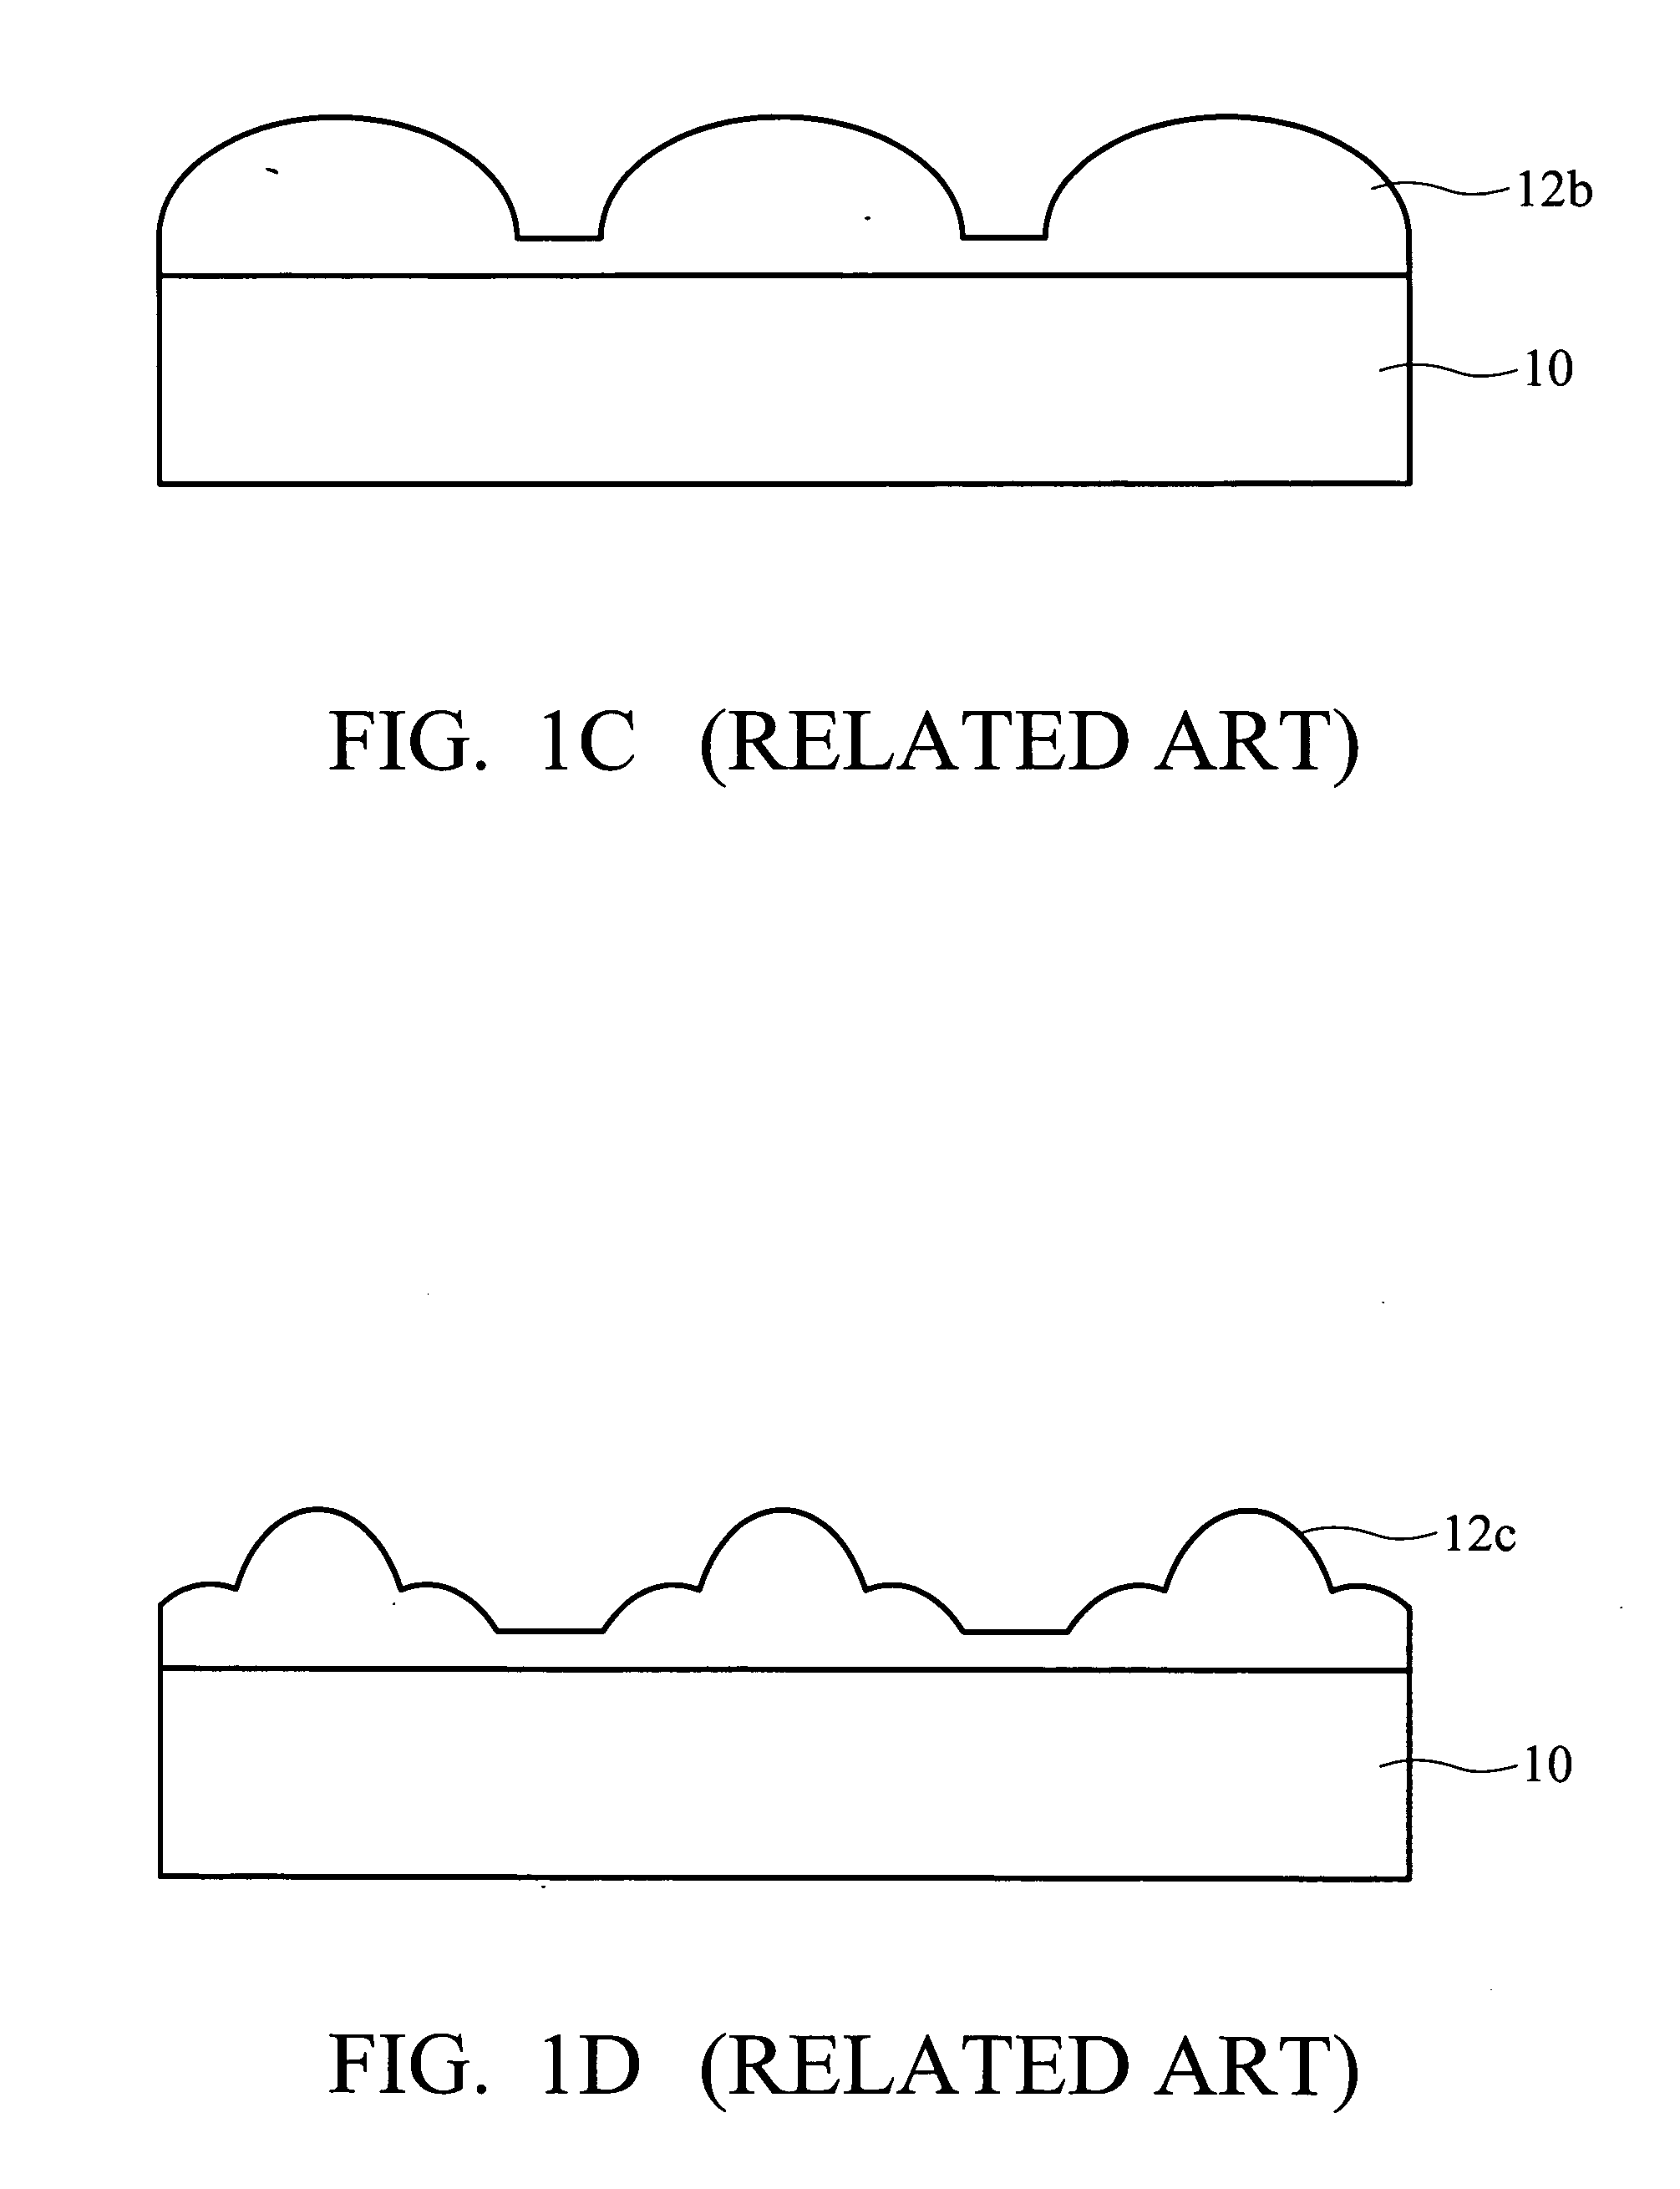 Hemi-spherical structure and method for fabricating the same